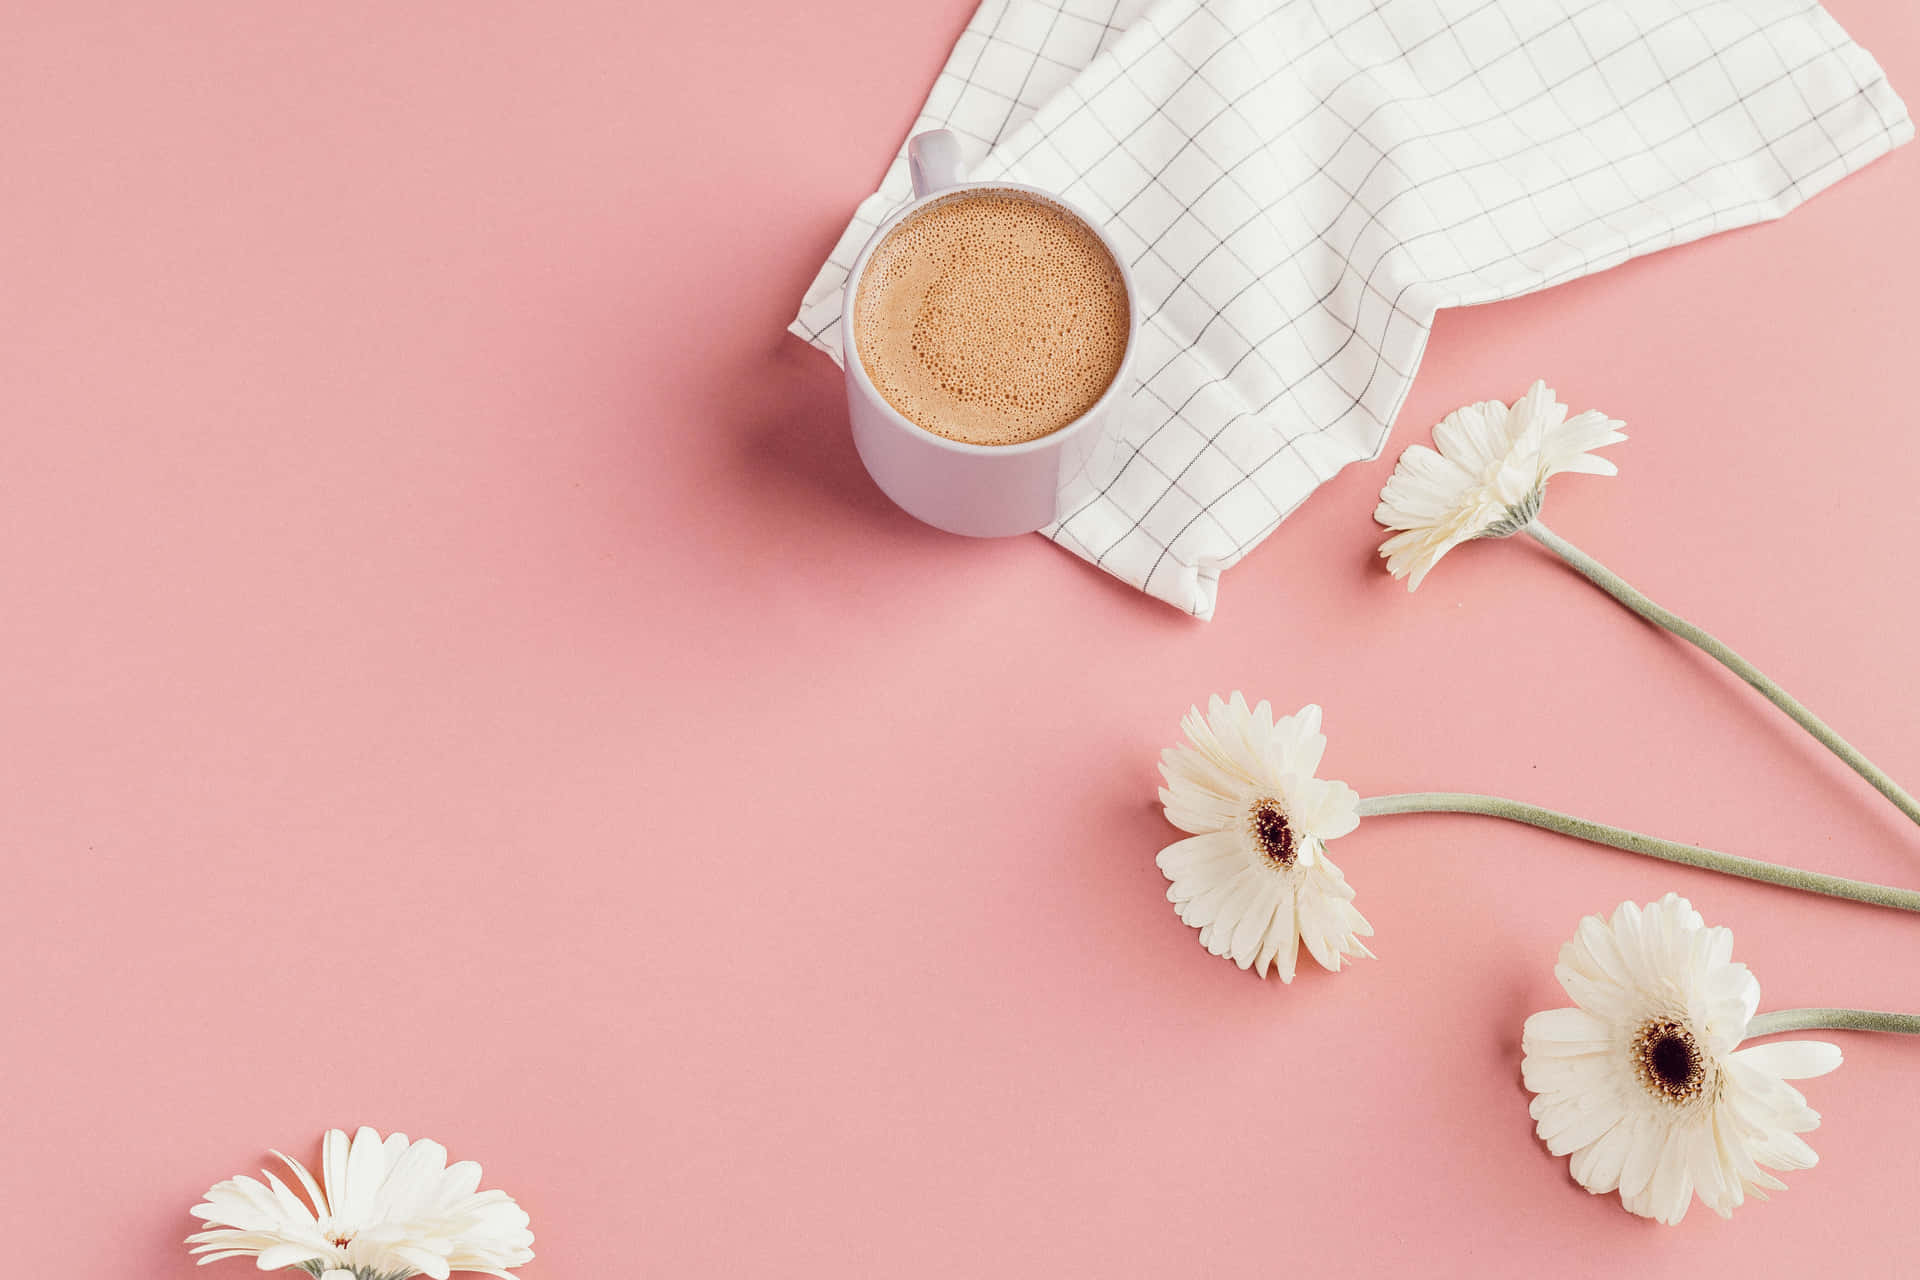 a cup of coffee and flowers on a pink background